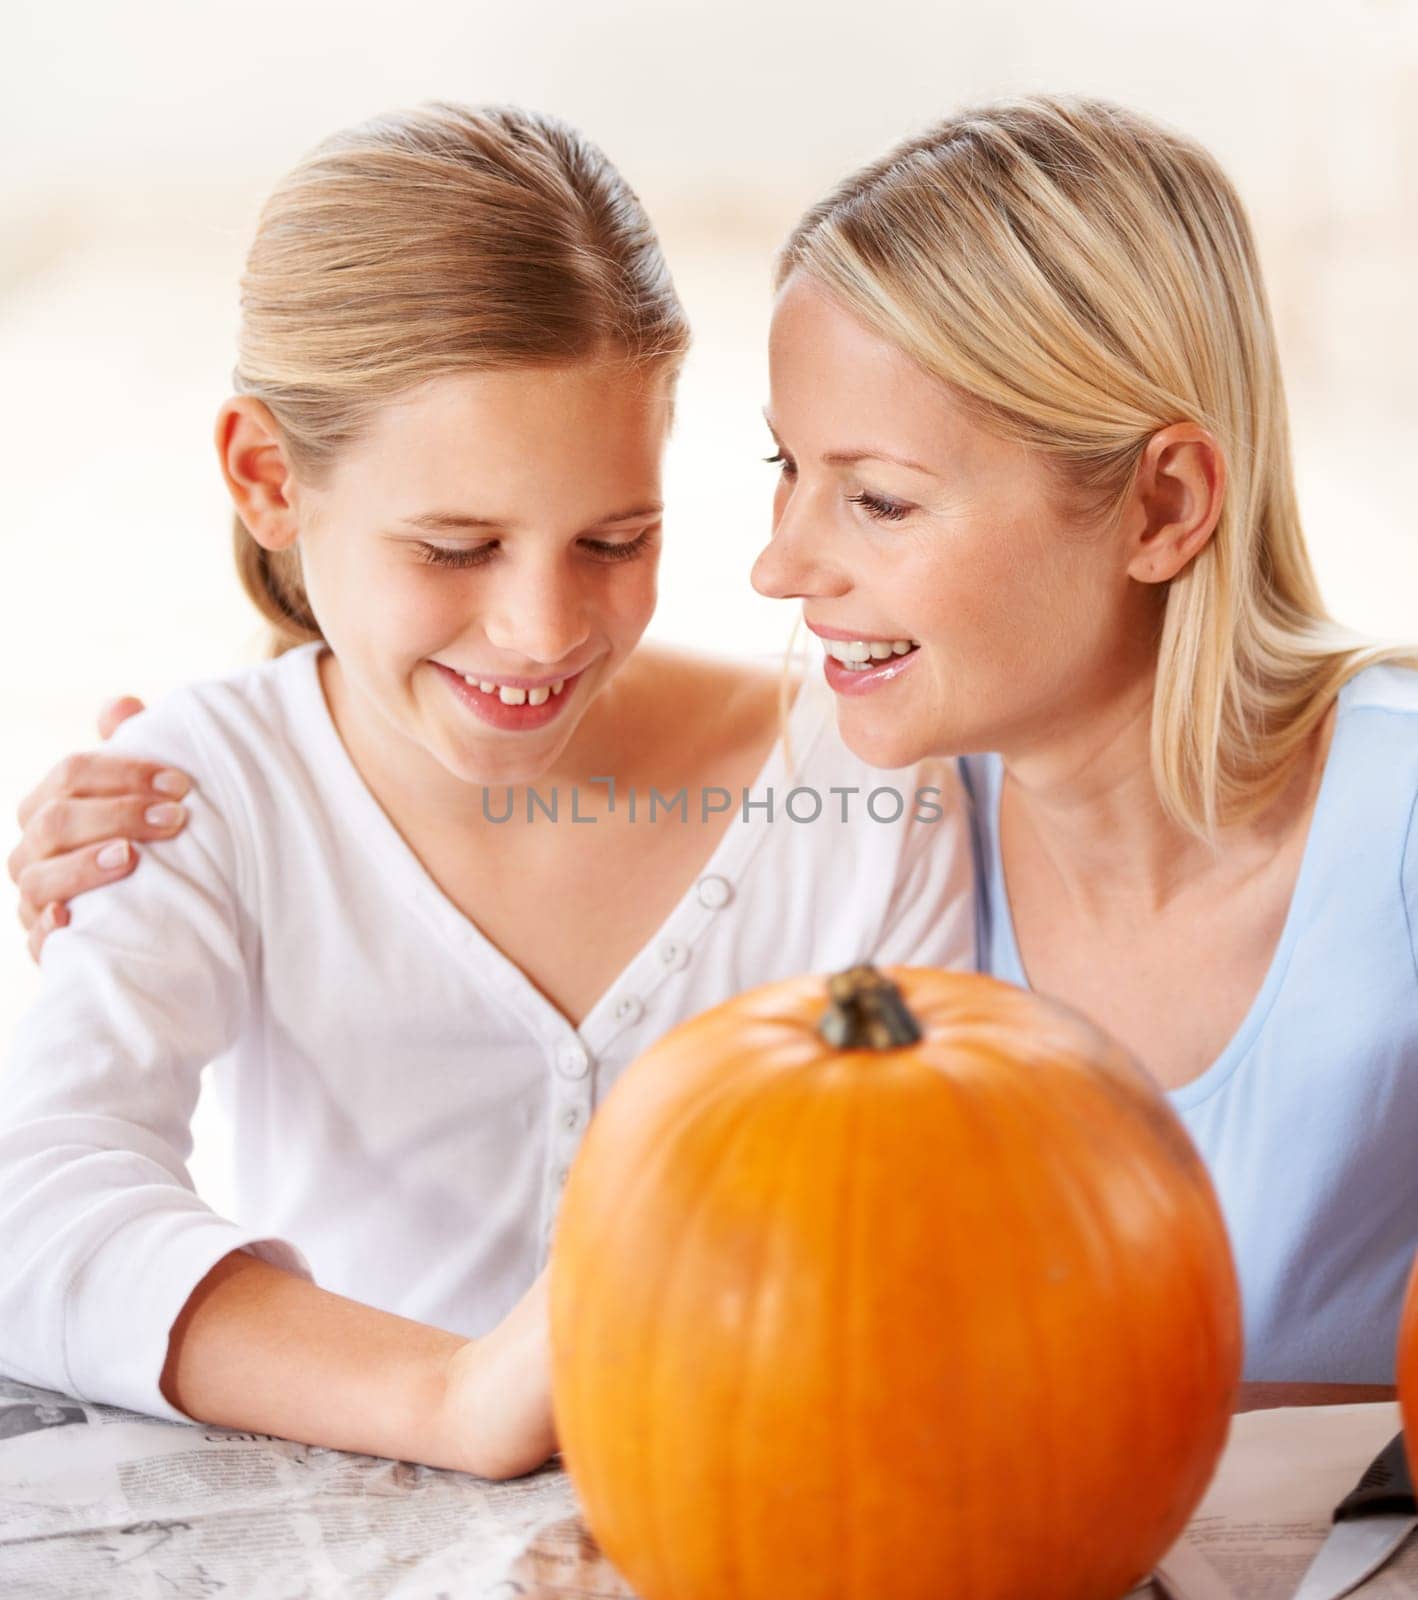 Happy, mother and child with pumpkin to celebrate halloween, party and fun together at home. Young girl, mom and family carving orange vegetable for holiday lantern, decoration or creativity of craft.